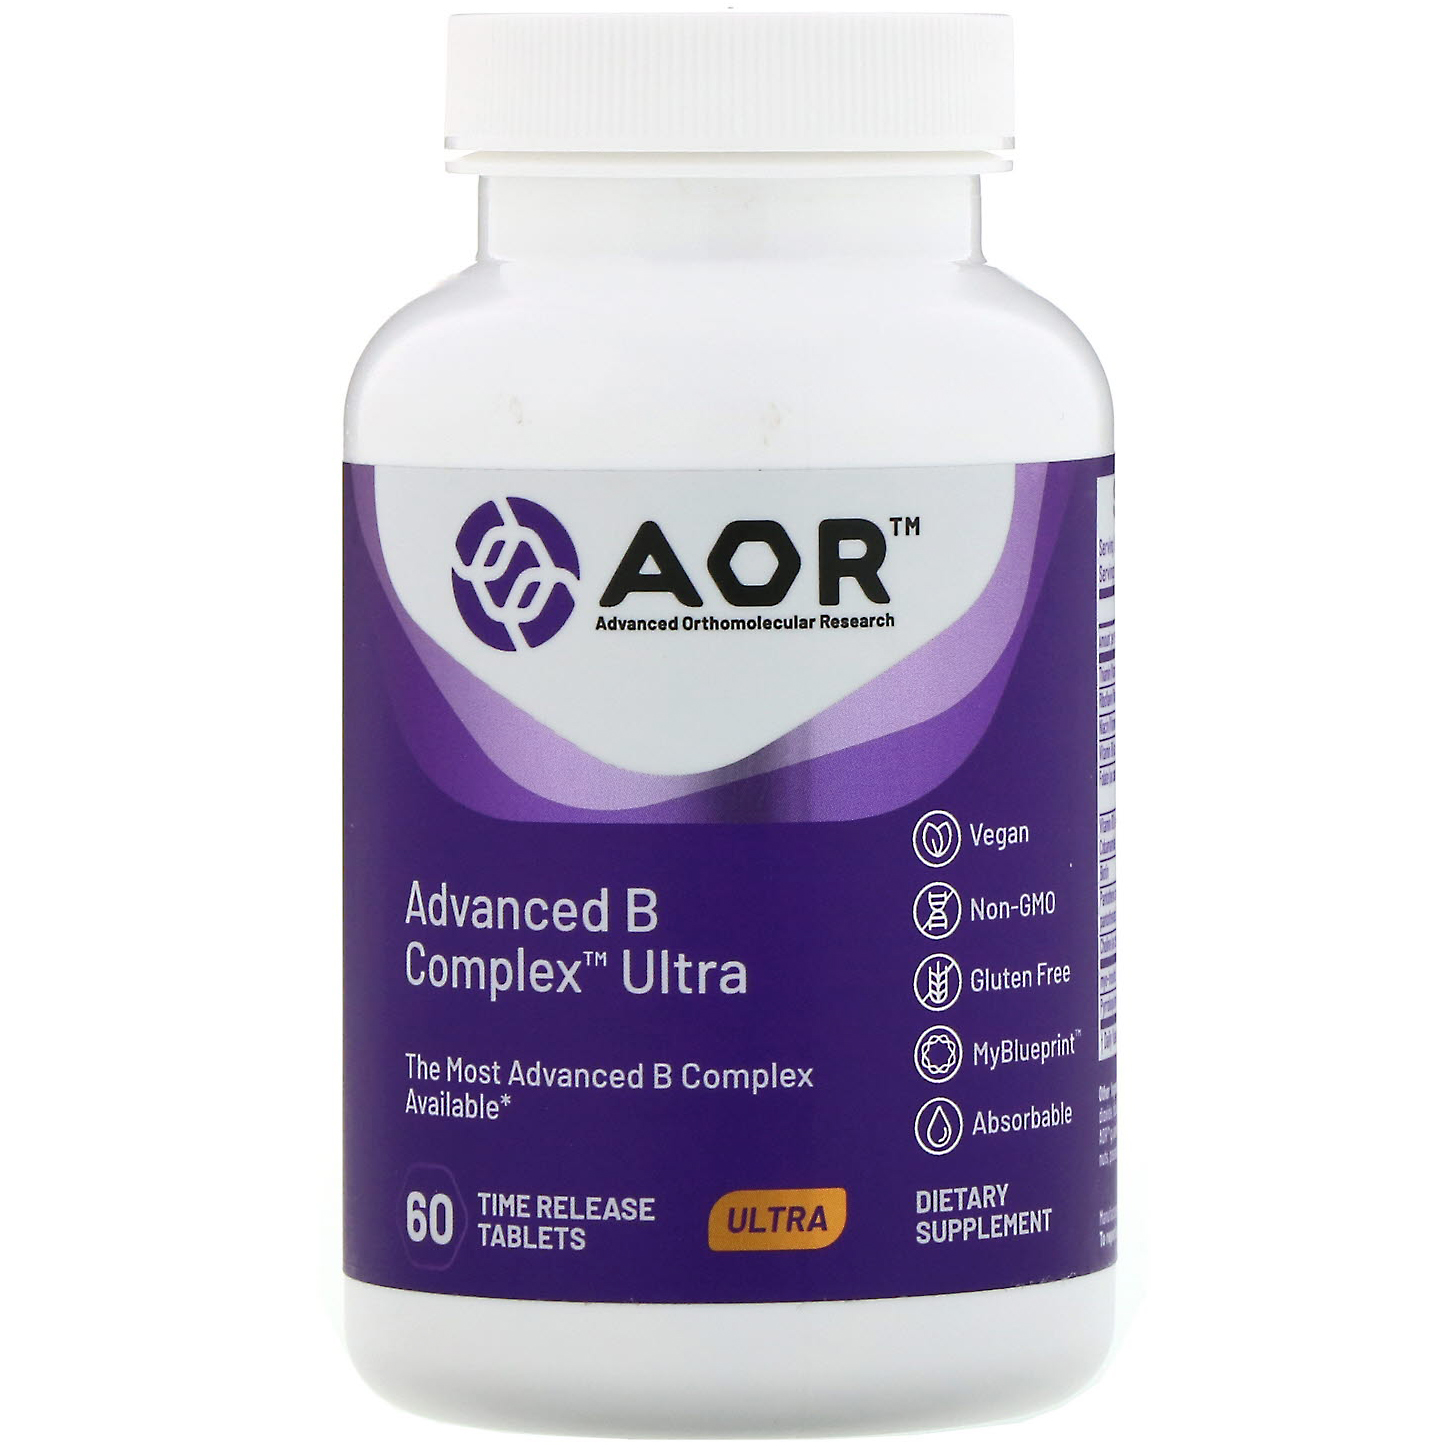 Advanced B Complex Ultra, 60 Time Release Tablets 2